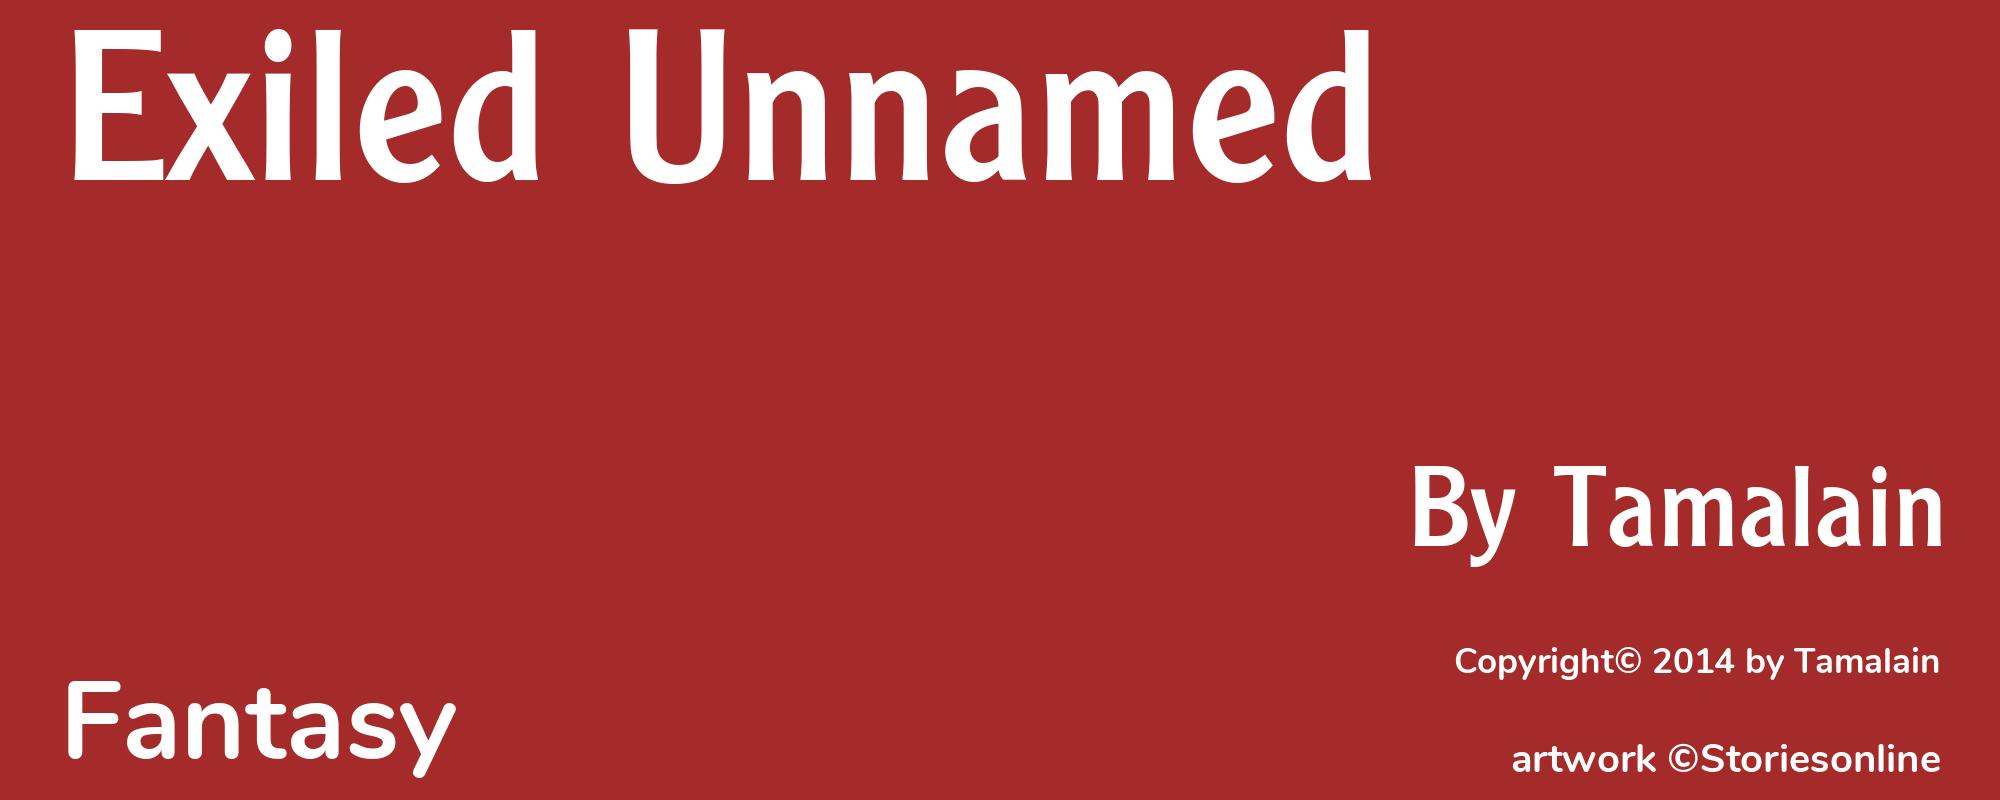 Exiled Unnamed - Cover